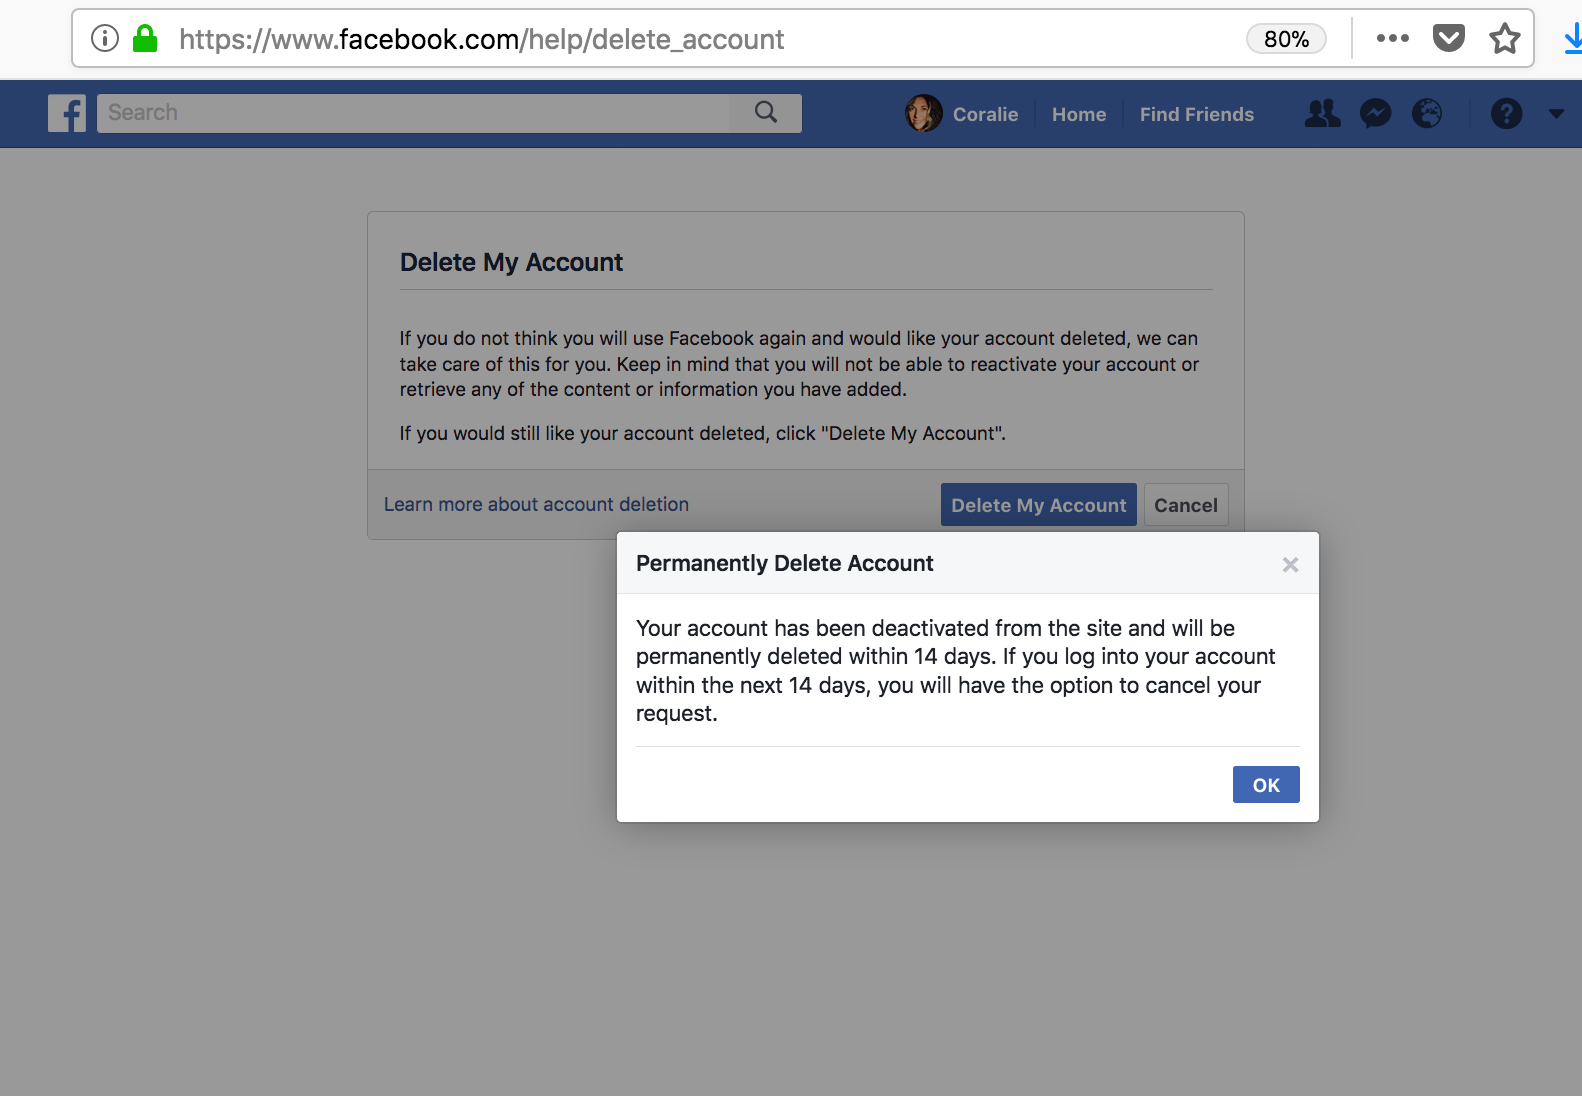 Screenshot of the Facebook delete page showing the pop-in to permanently delete the account